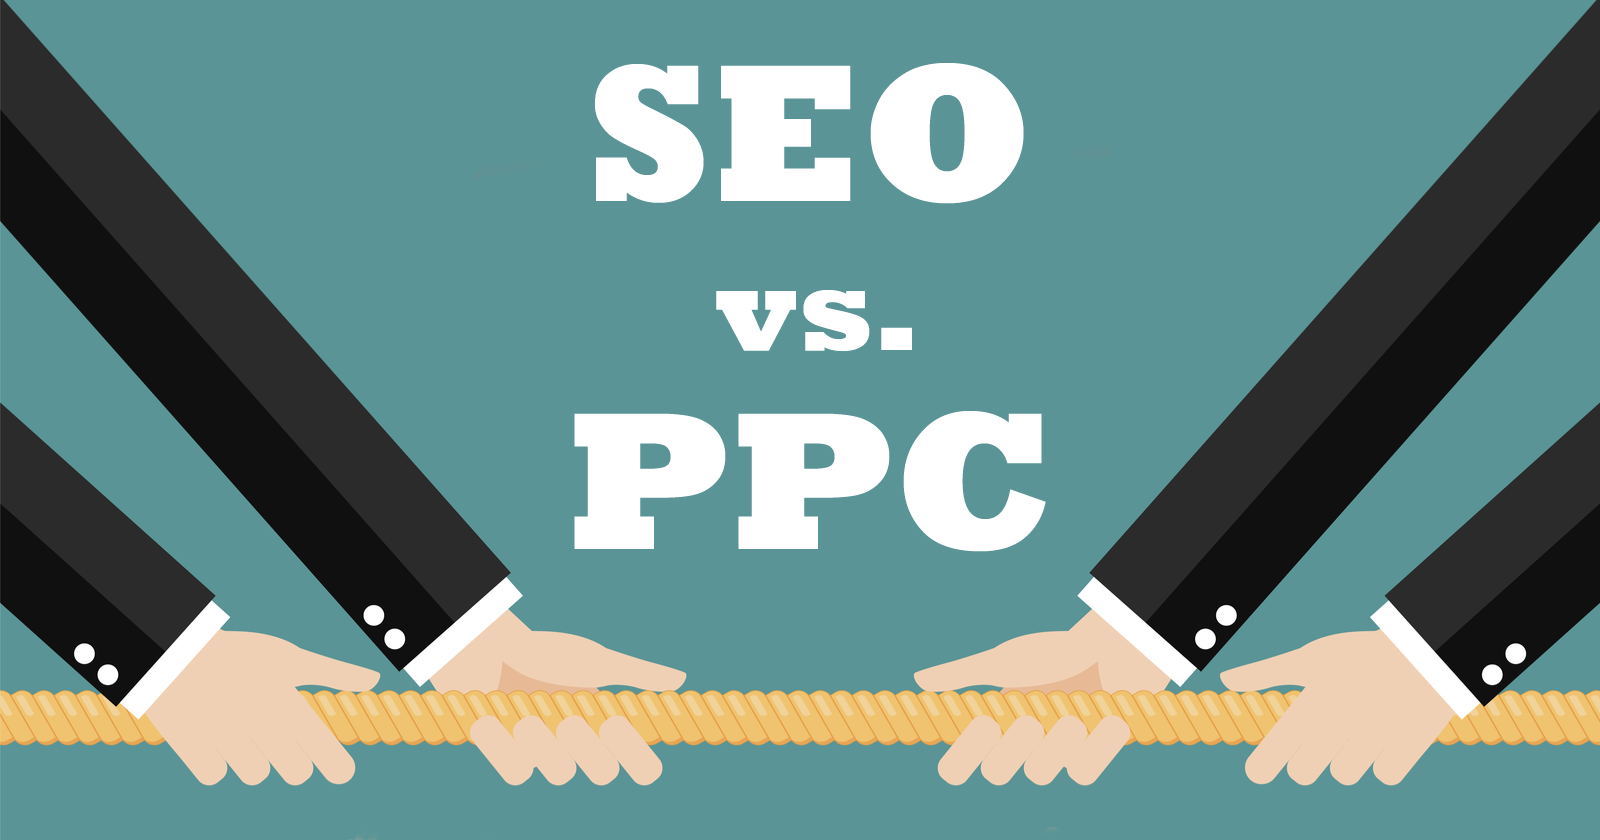 SEM vs. SEO: What’s The Difference?